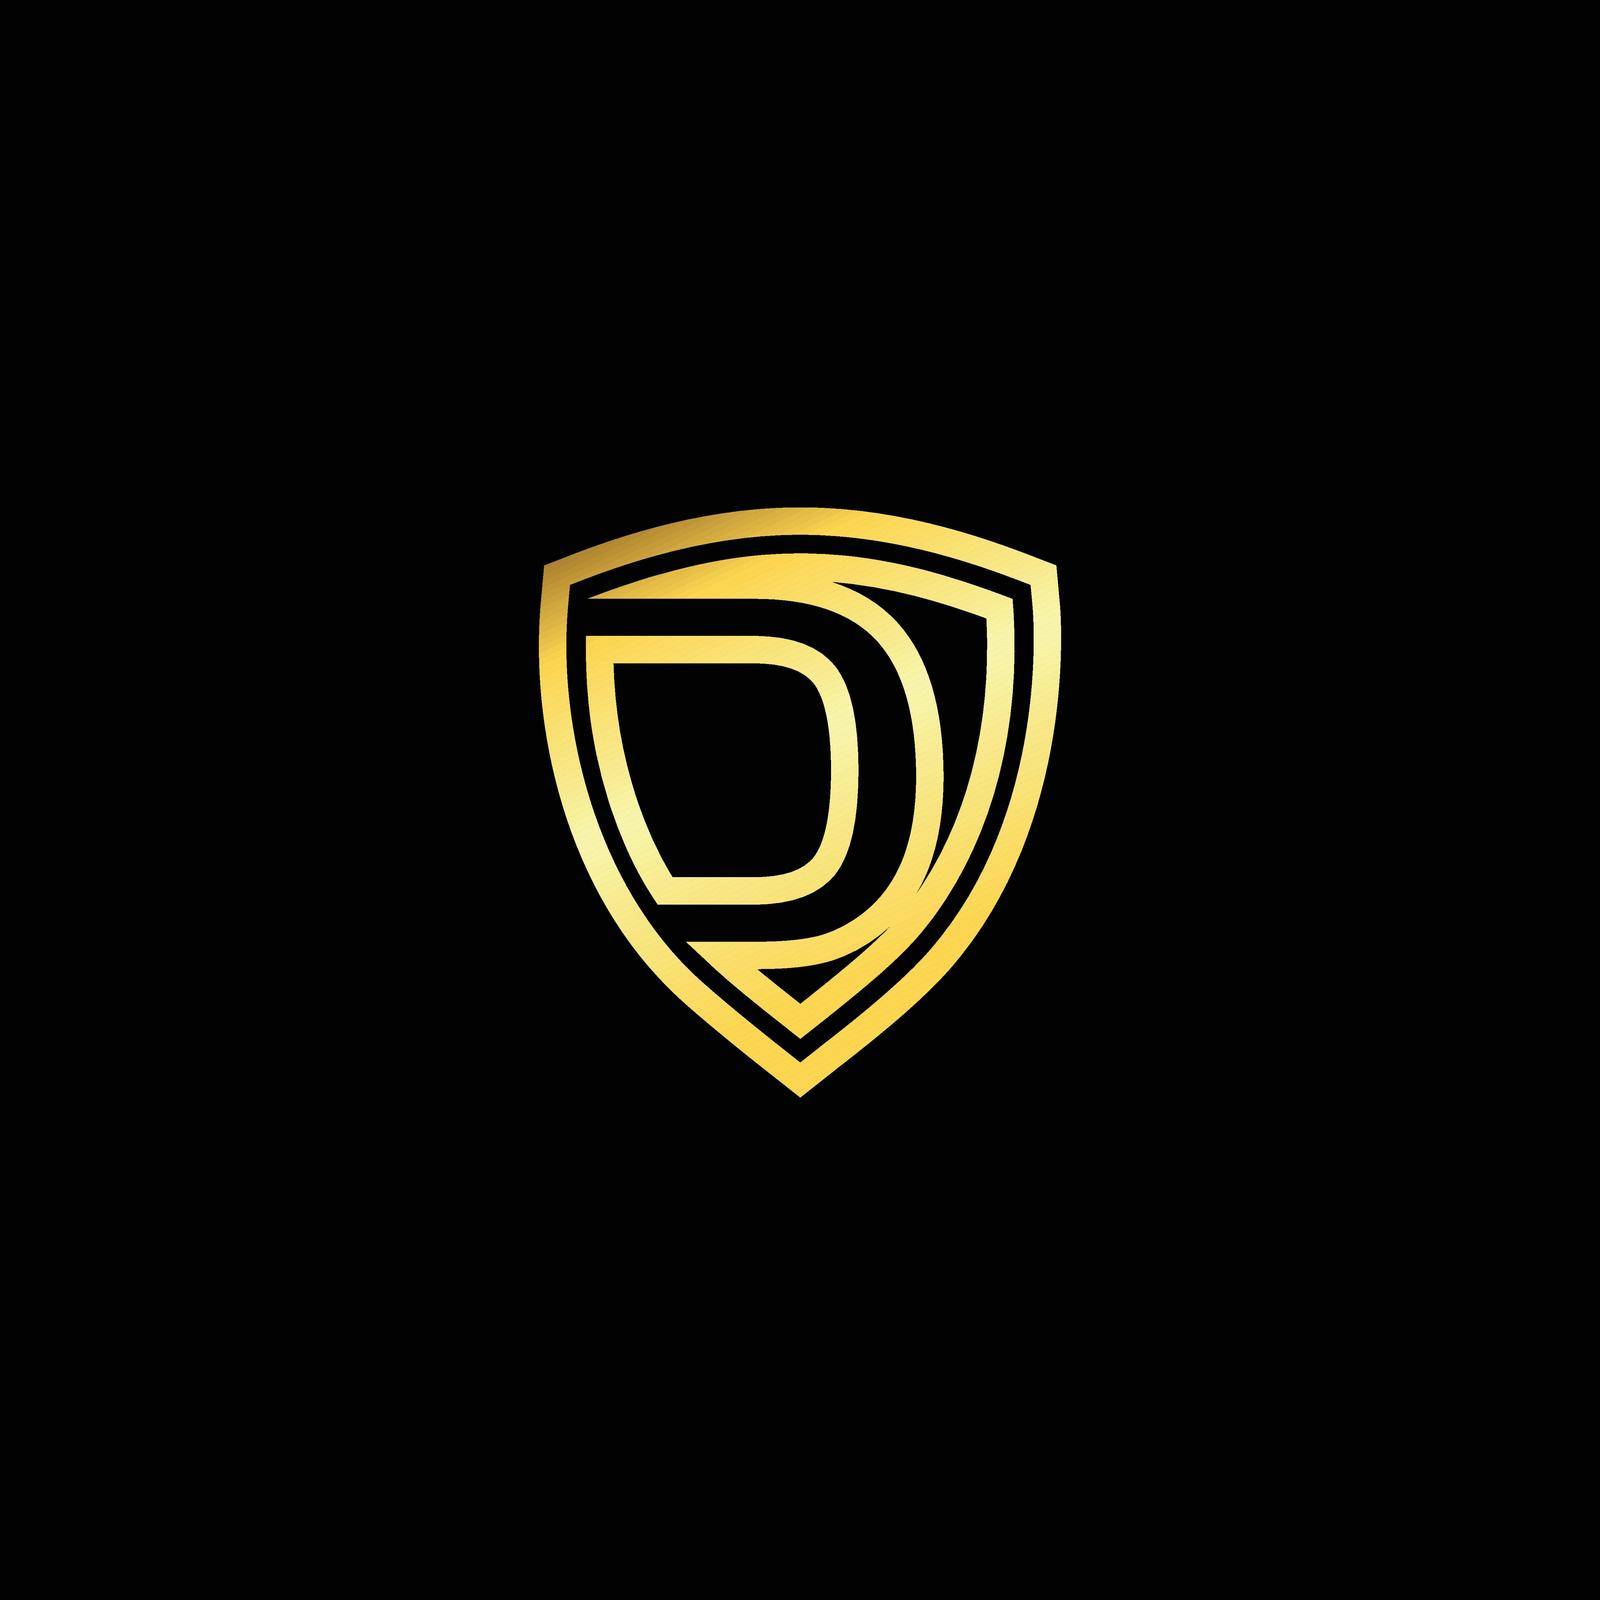 Letter D on a shield, isolated on a dark background. Luxurious, elegant, for branding purposes. Unique classy concept.. Letter shield logo design concept template by ANITA